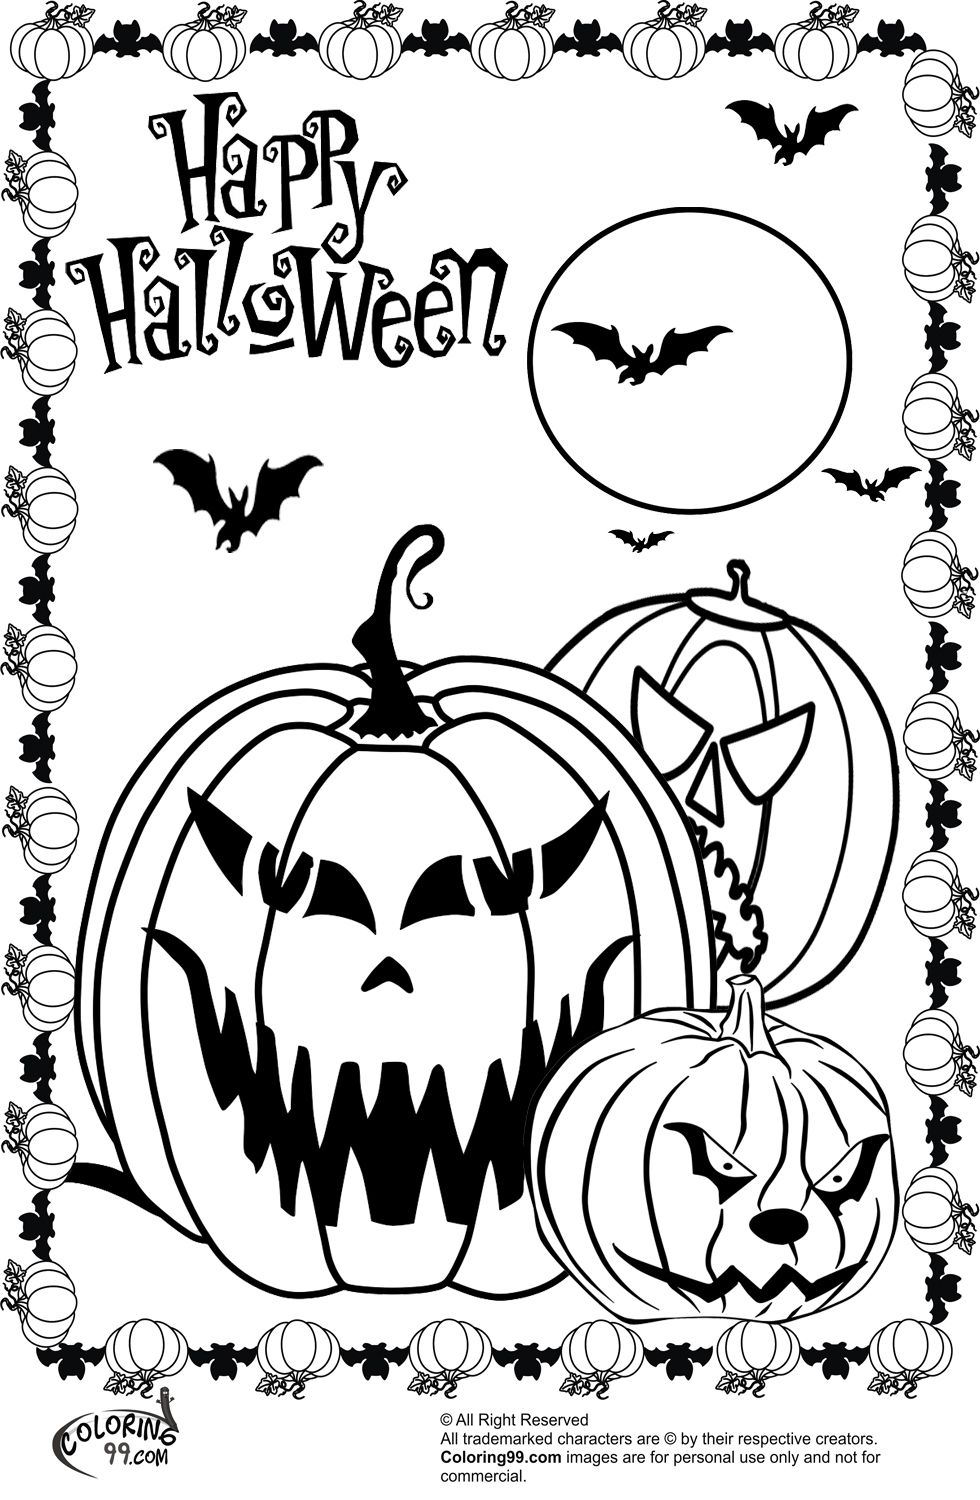 get-scary-halloween-coloring-pages-for-adults-background-colorist